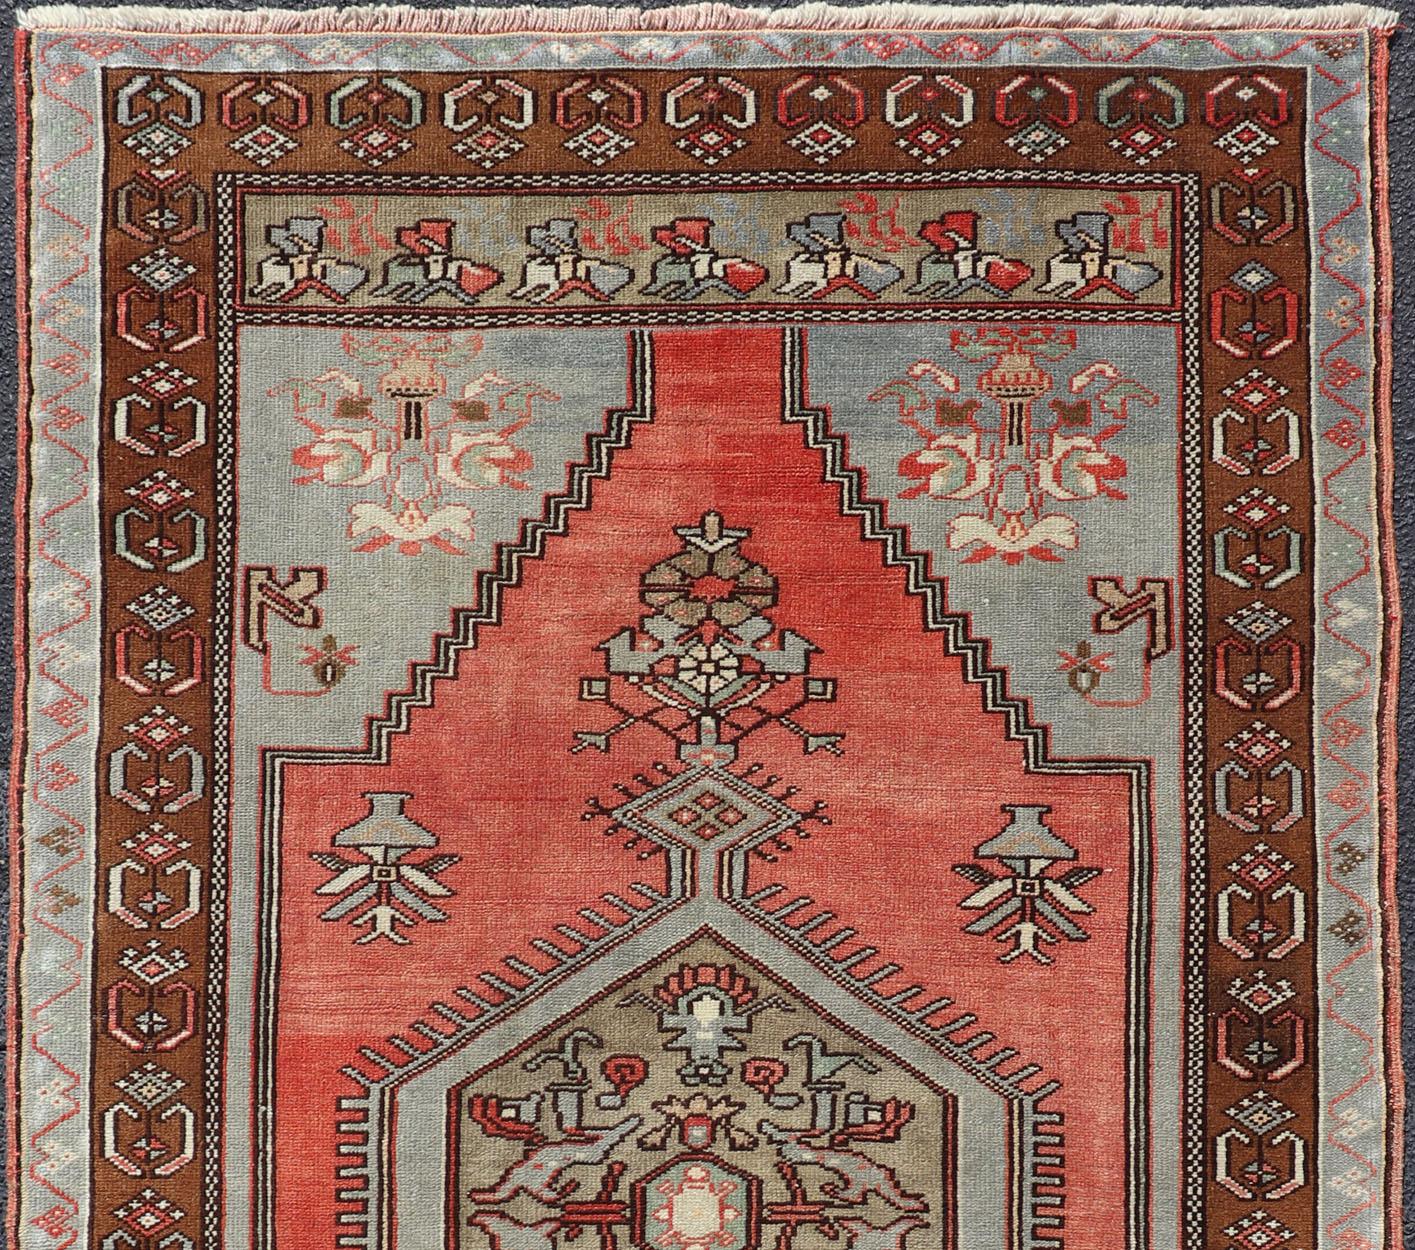 Medallion vintage Turkish Oushak in red, gray, charcoal, and brown, rug TU-NED-1022 country of origin / type: Turkey / Oushak, circa 1940.

This beautiful vintage Oushak runner from 1940s Turkey features a Classic Oushak design, which is enhanced